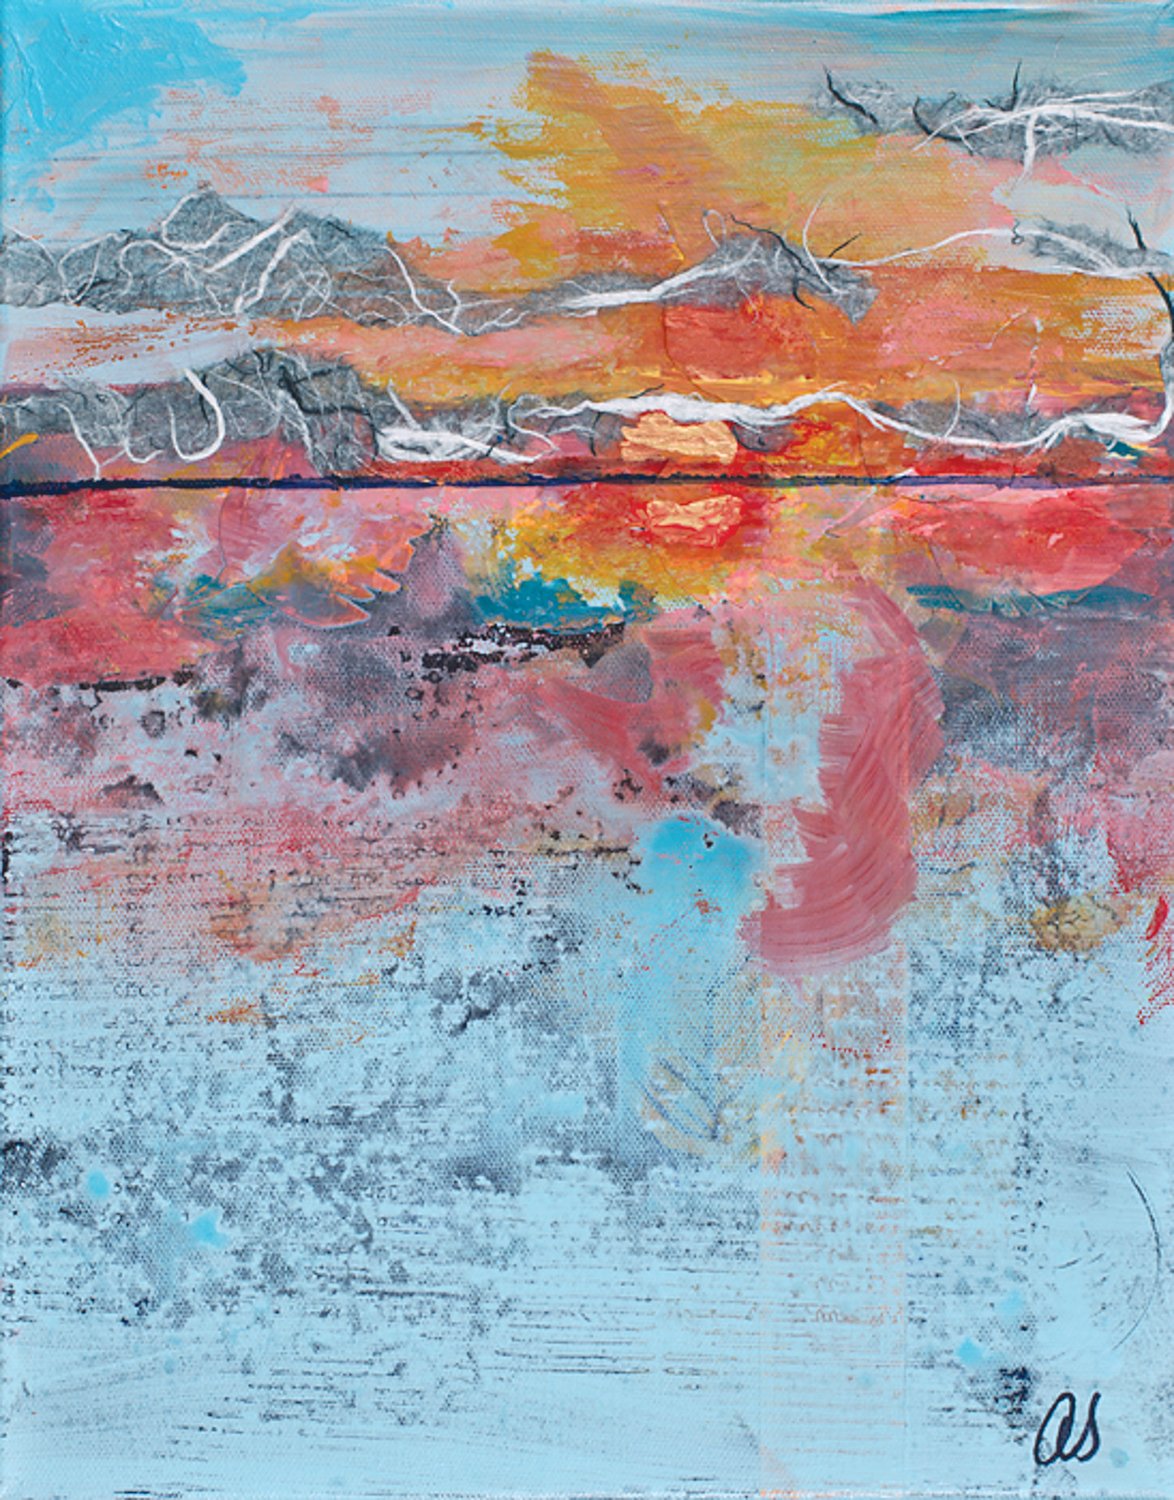 The mixed media work of Anne Schneider, on display at the Port Townsend Gallery in August.